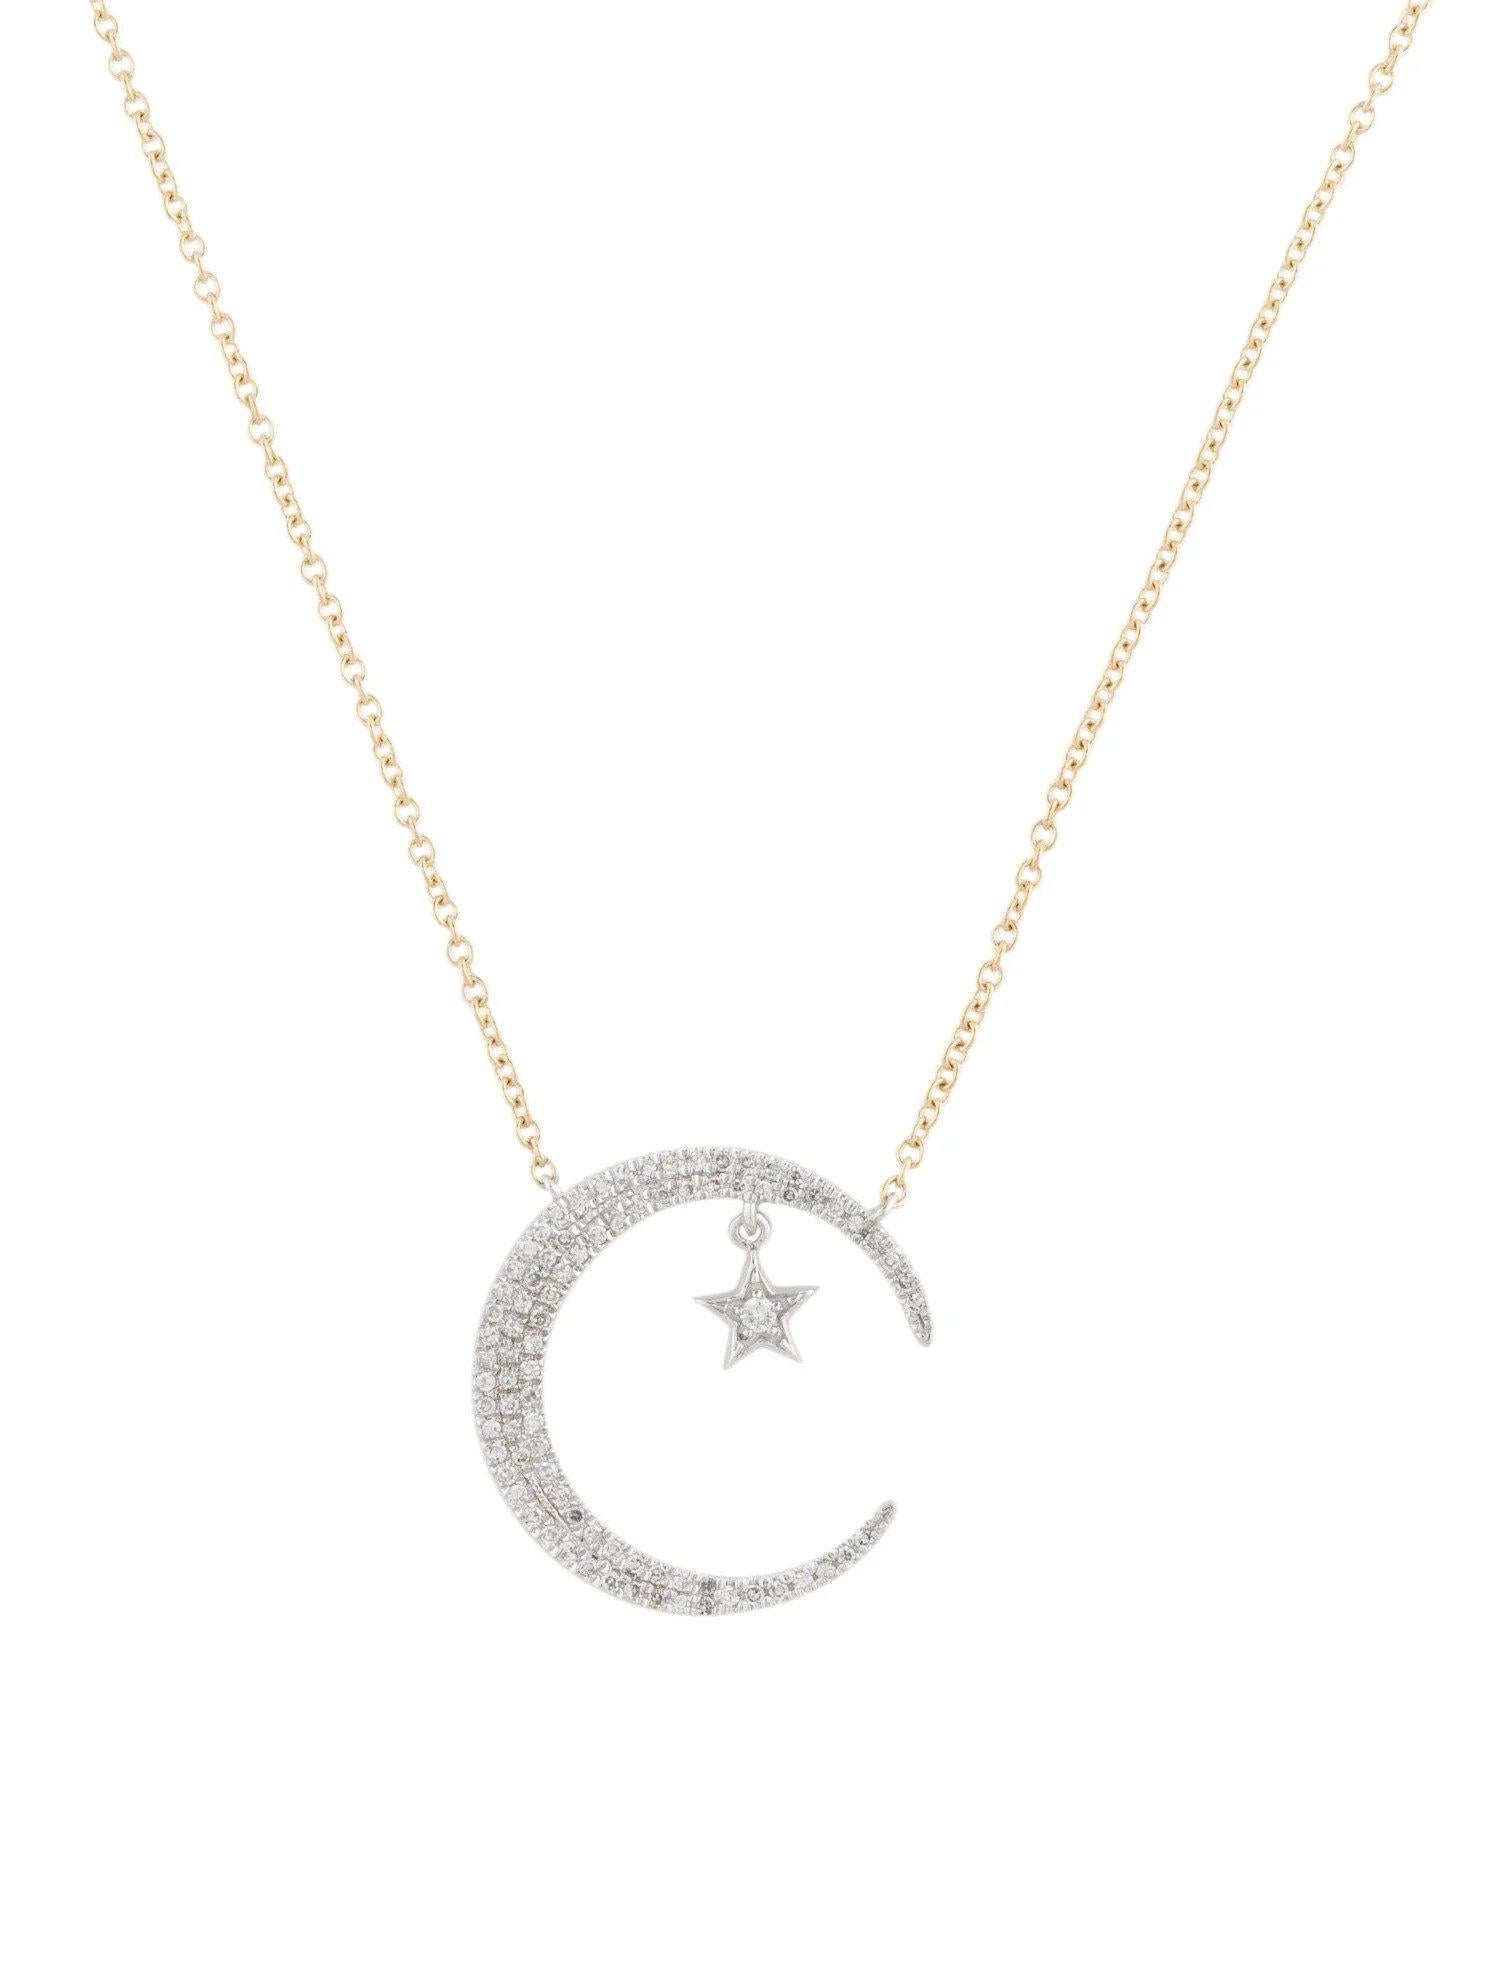 Round Cut 0.25 Carat Diamond Crescent Moon and Star White & Yellow Gold Pendant Necklace For Sale